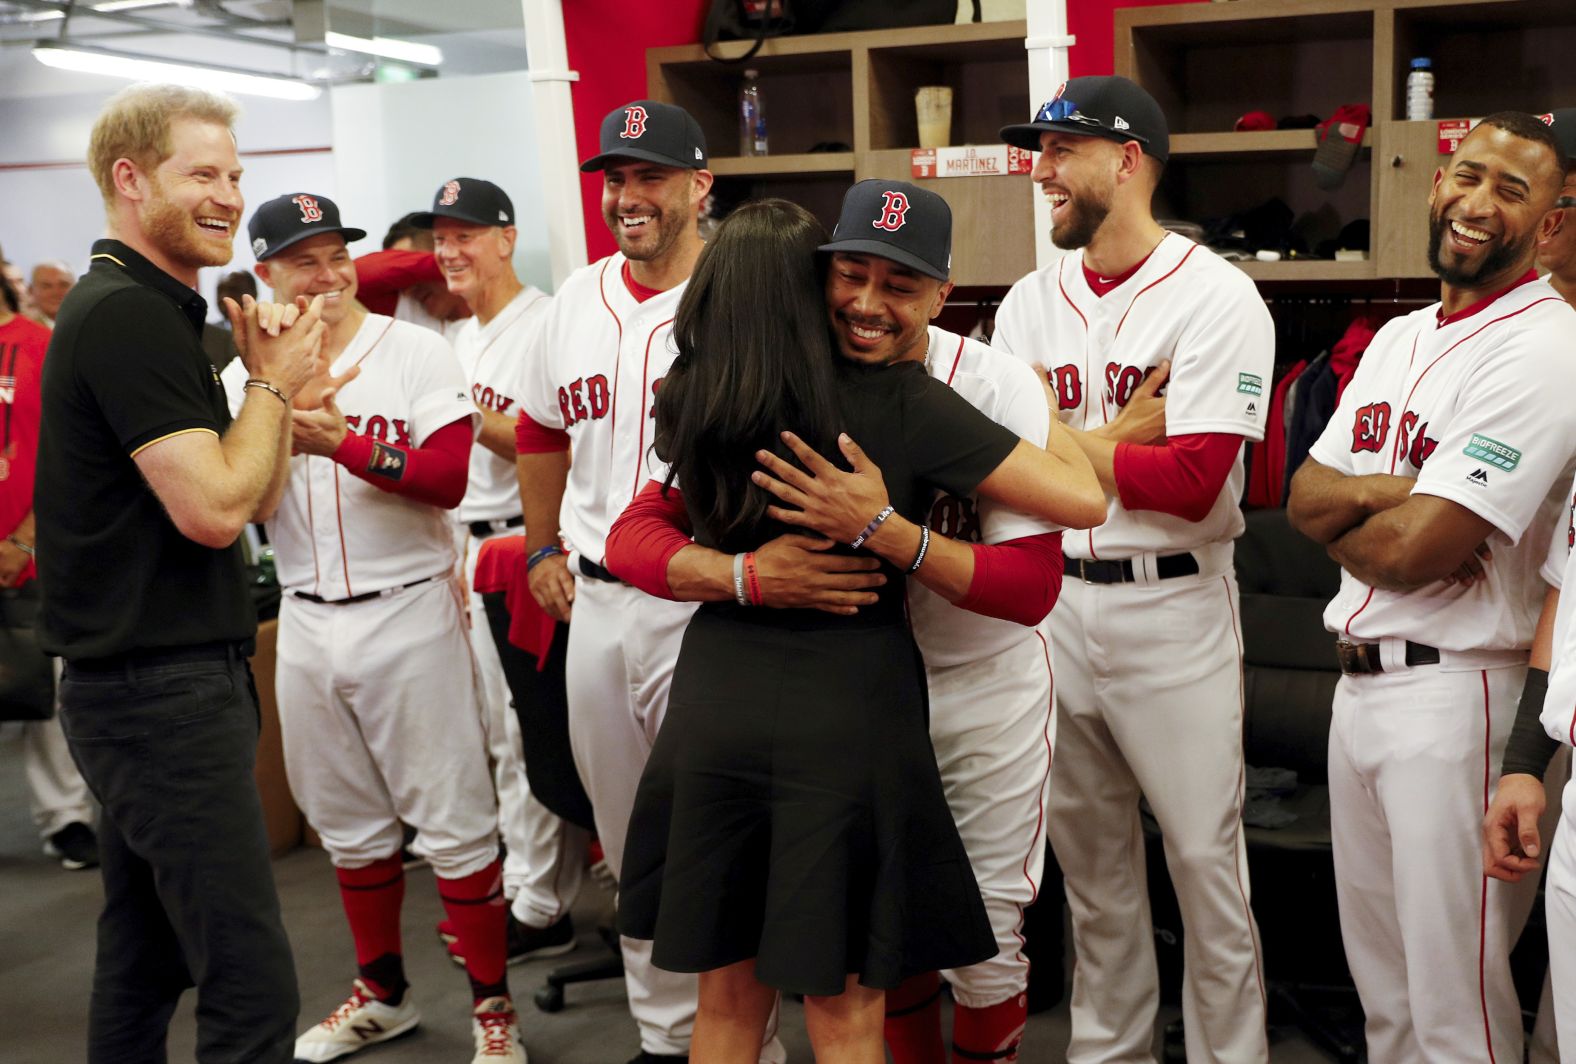 Meghan Markle, Duchess of Sussex, hugs Mookie Betts of the Boston Red Sox prior to game one of the London Series on June 29.